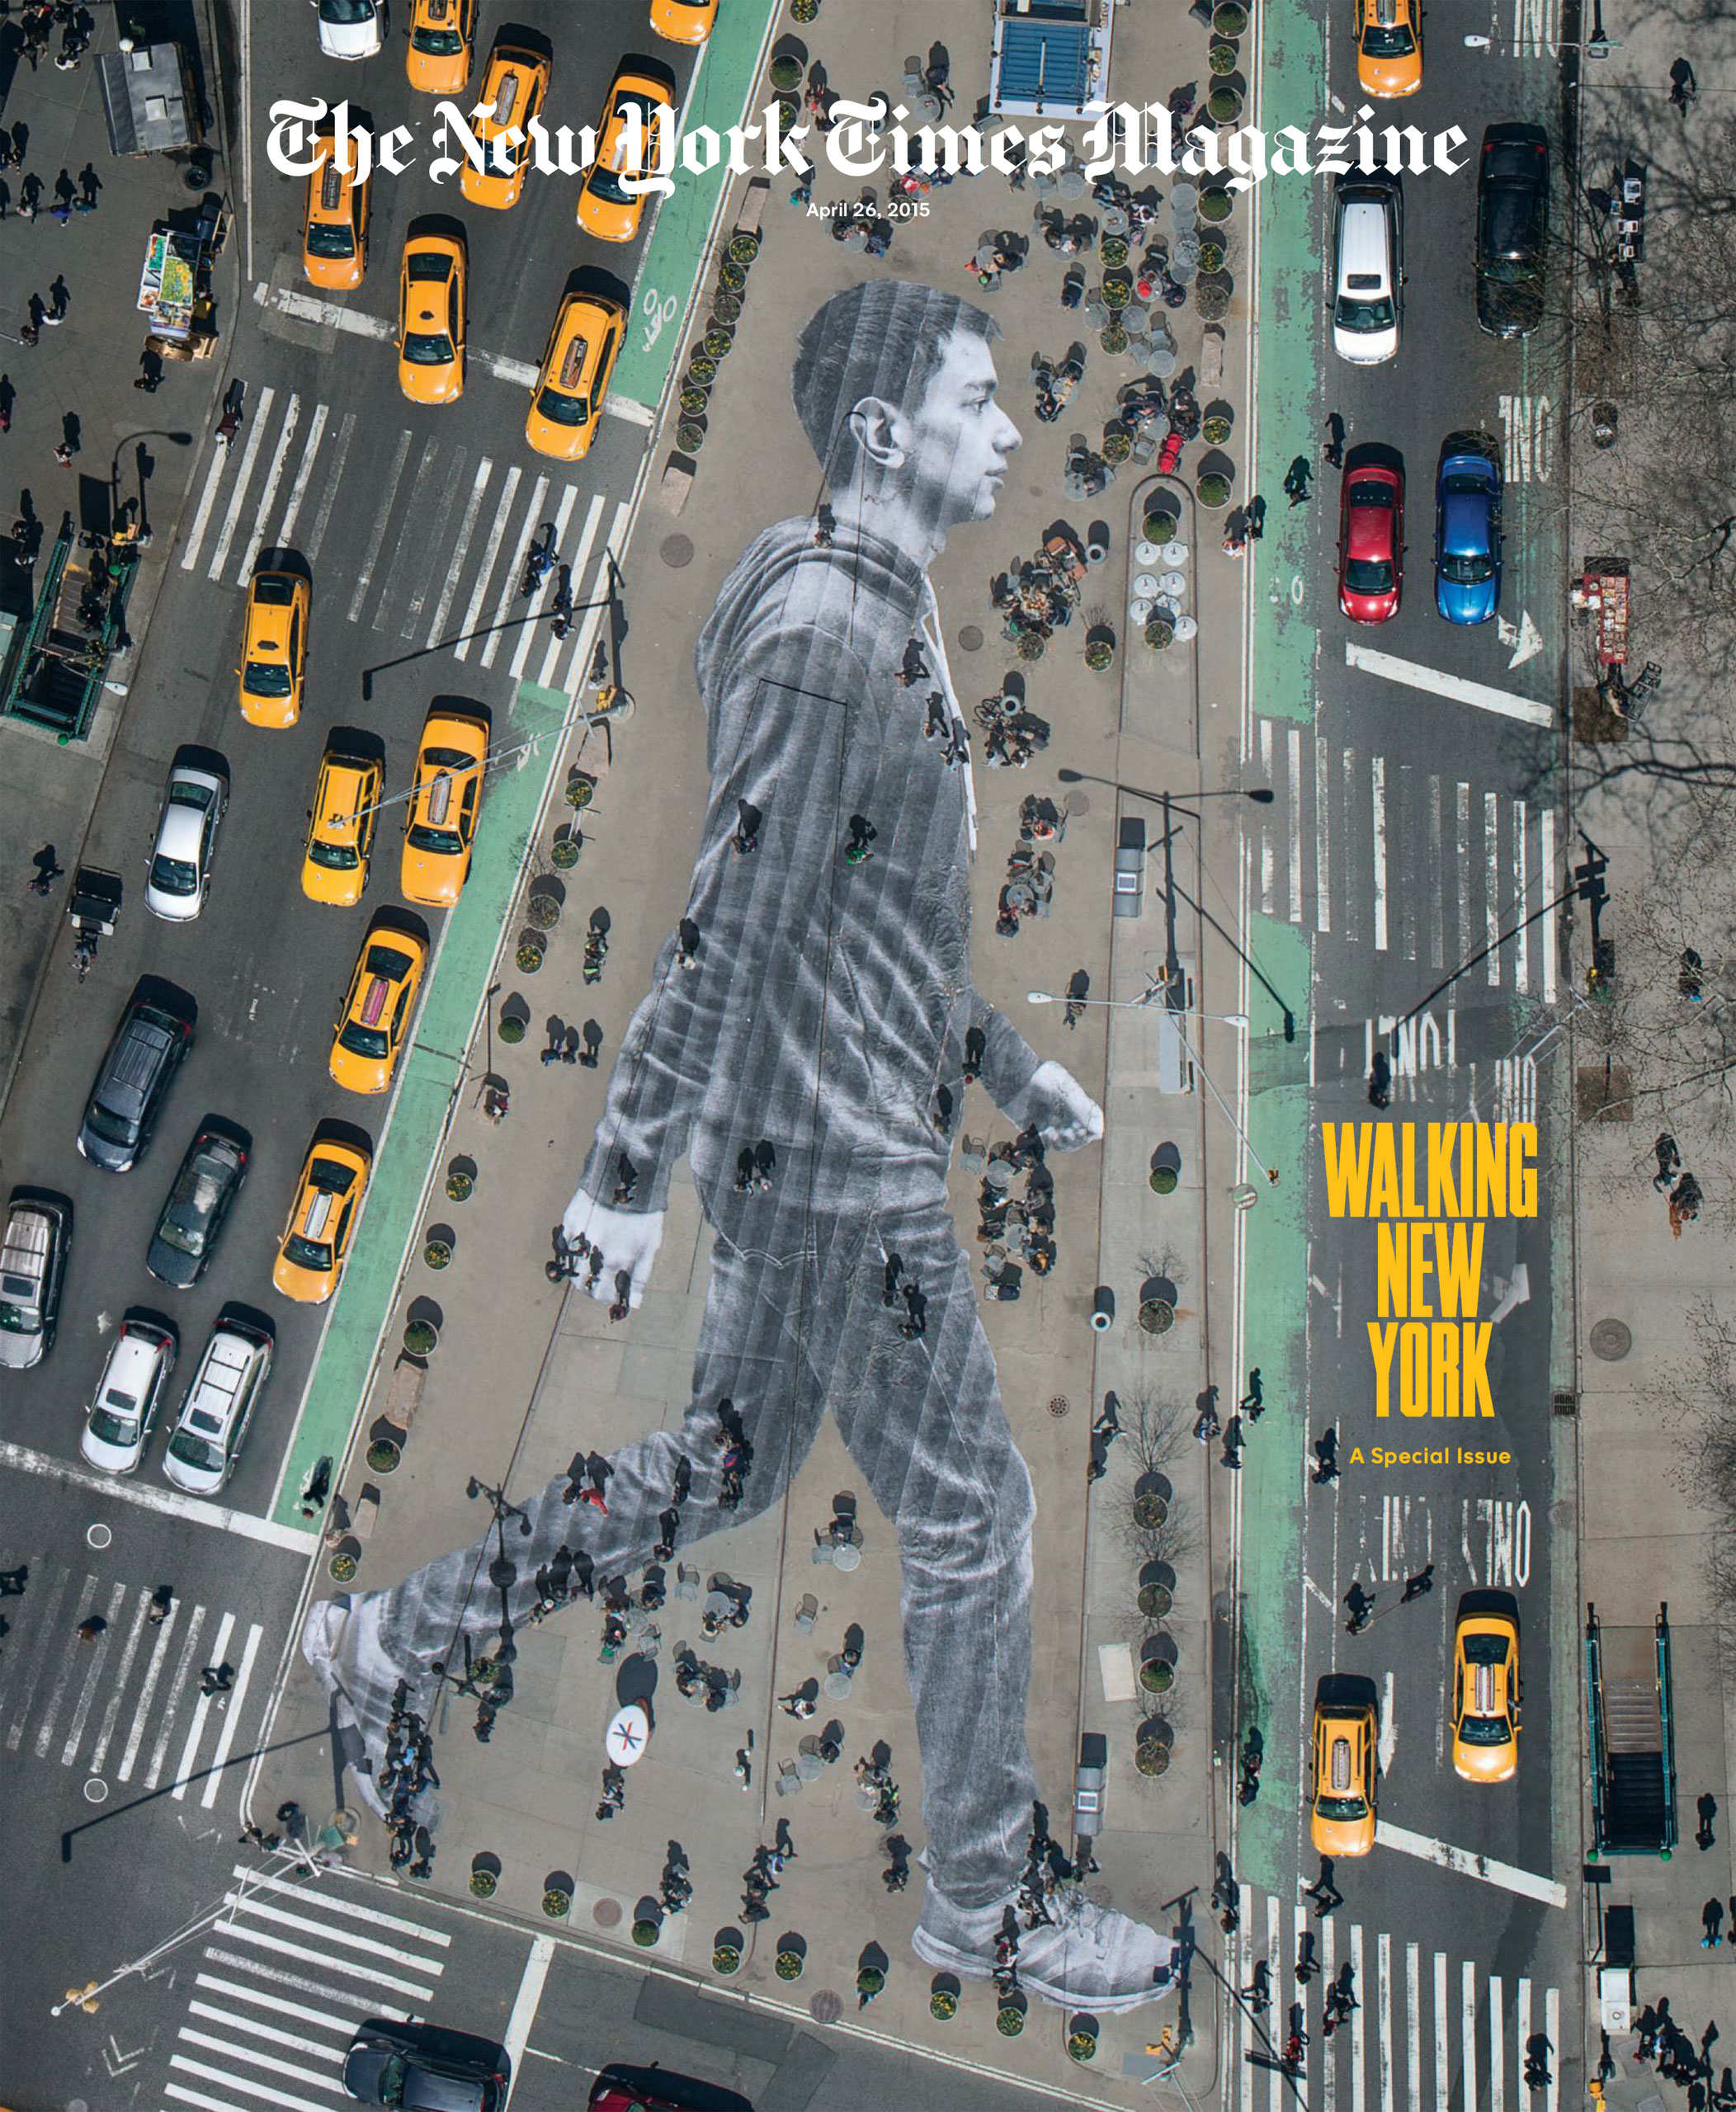 The New York Times Magazine, April 26, 2015.
                              Photograph by JR.
                              
                              The image on this cover, by the French artist JR, was created exclusively for The New York Times Magazine for our special issue about walking New York. JR does huge pastings of photographs on various sites around the world. For our cover, he pasted a 150-foot-tall image of Elmar Aliyev, a 20-year-old who immigrated to the U.S. from Azerbaijan last August, onto the ground of the Flatiron Plaza. At 4:00 a.m. on the morning of April 11, 2015, JR and his crew began pasting this image of Aliyev onto the pavement. The photograph had been printed out onto 62 strips of paper. The pasting took about three and a half hours. Later in the day, JR went up in a helicopter to make this picture for the cover. At 7:45 p.m. that night, the strips of paper were power-washed off the plaza.
                              
                              —Kathy Ryan, Director of Photography The New York Times Magazine